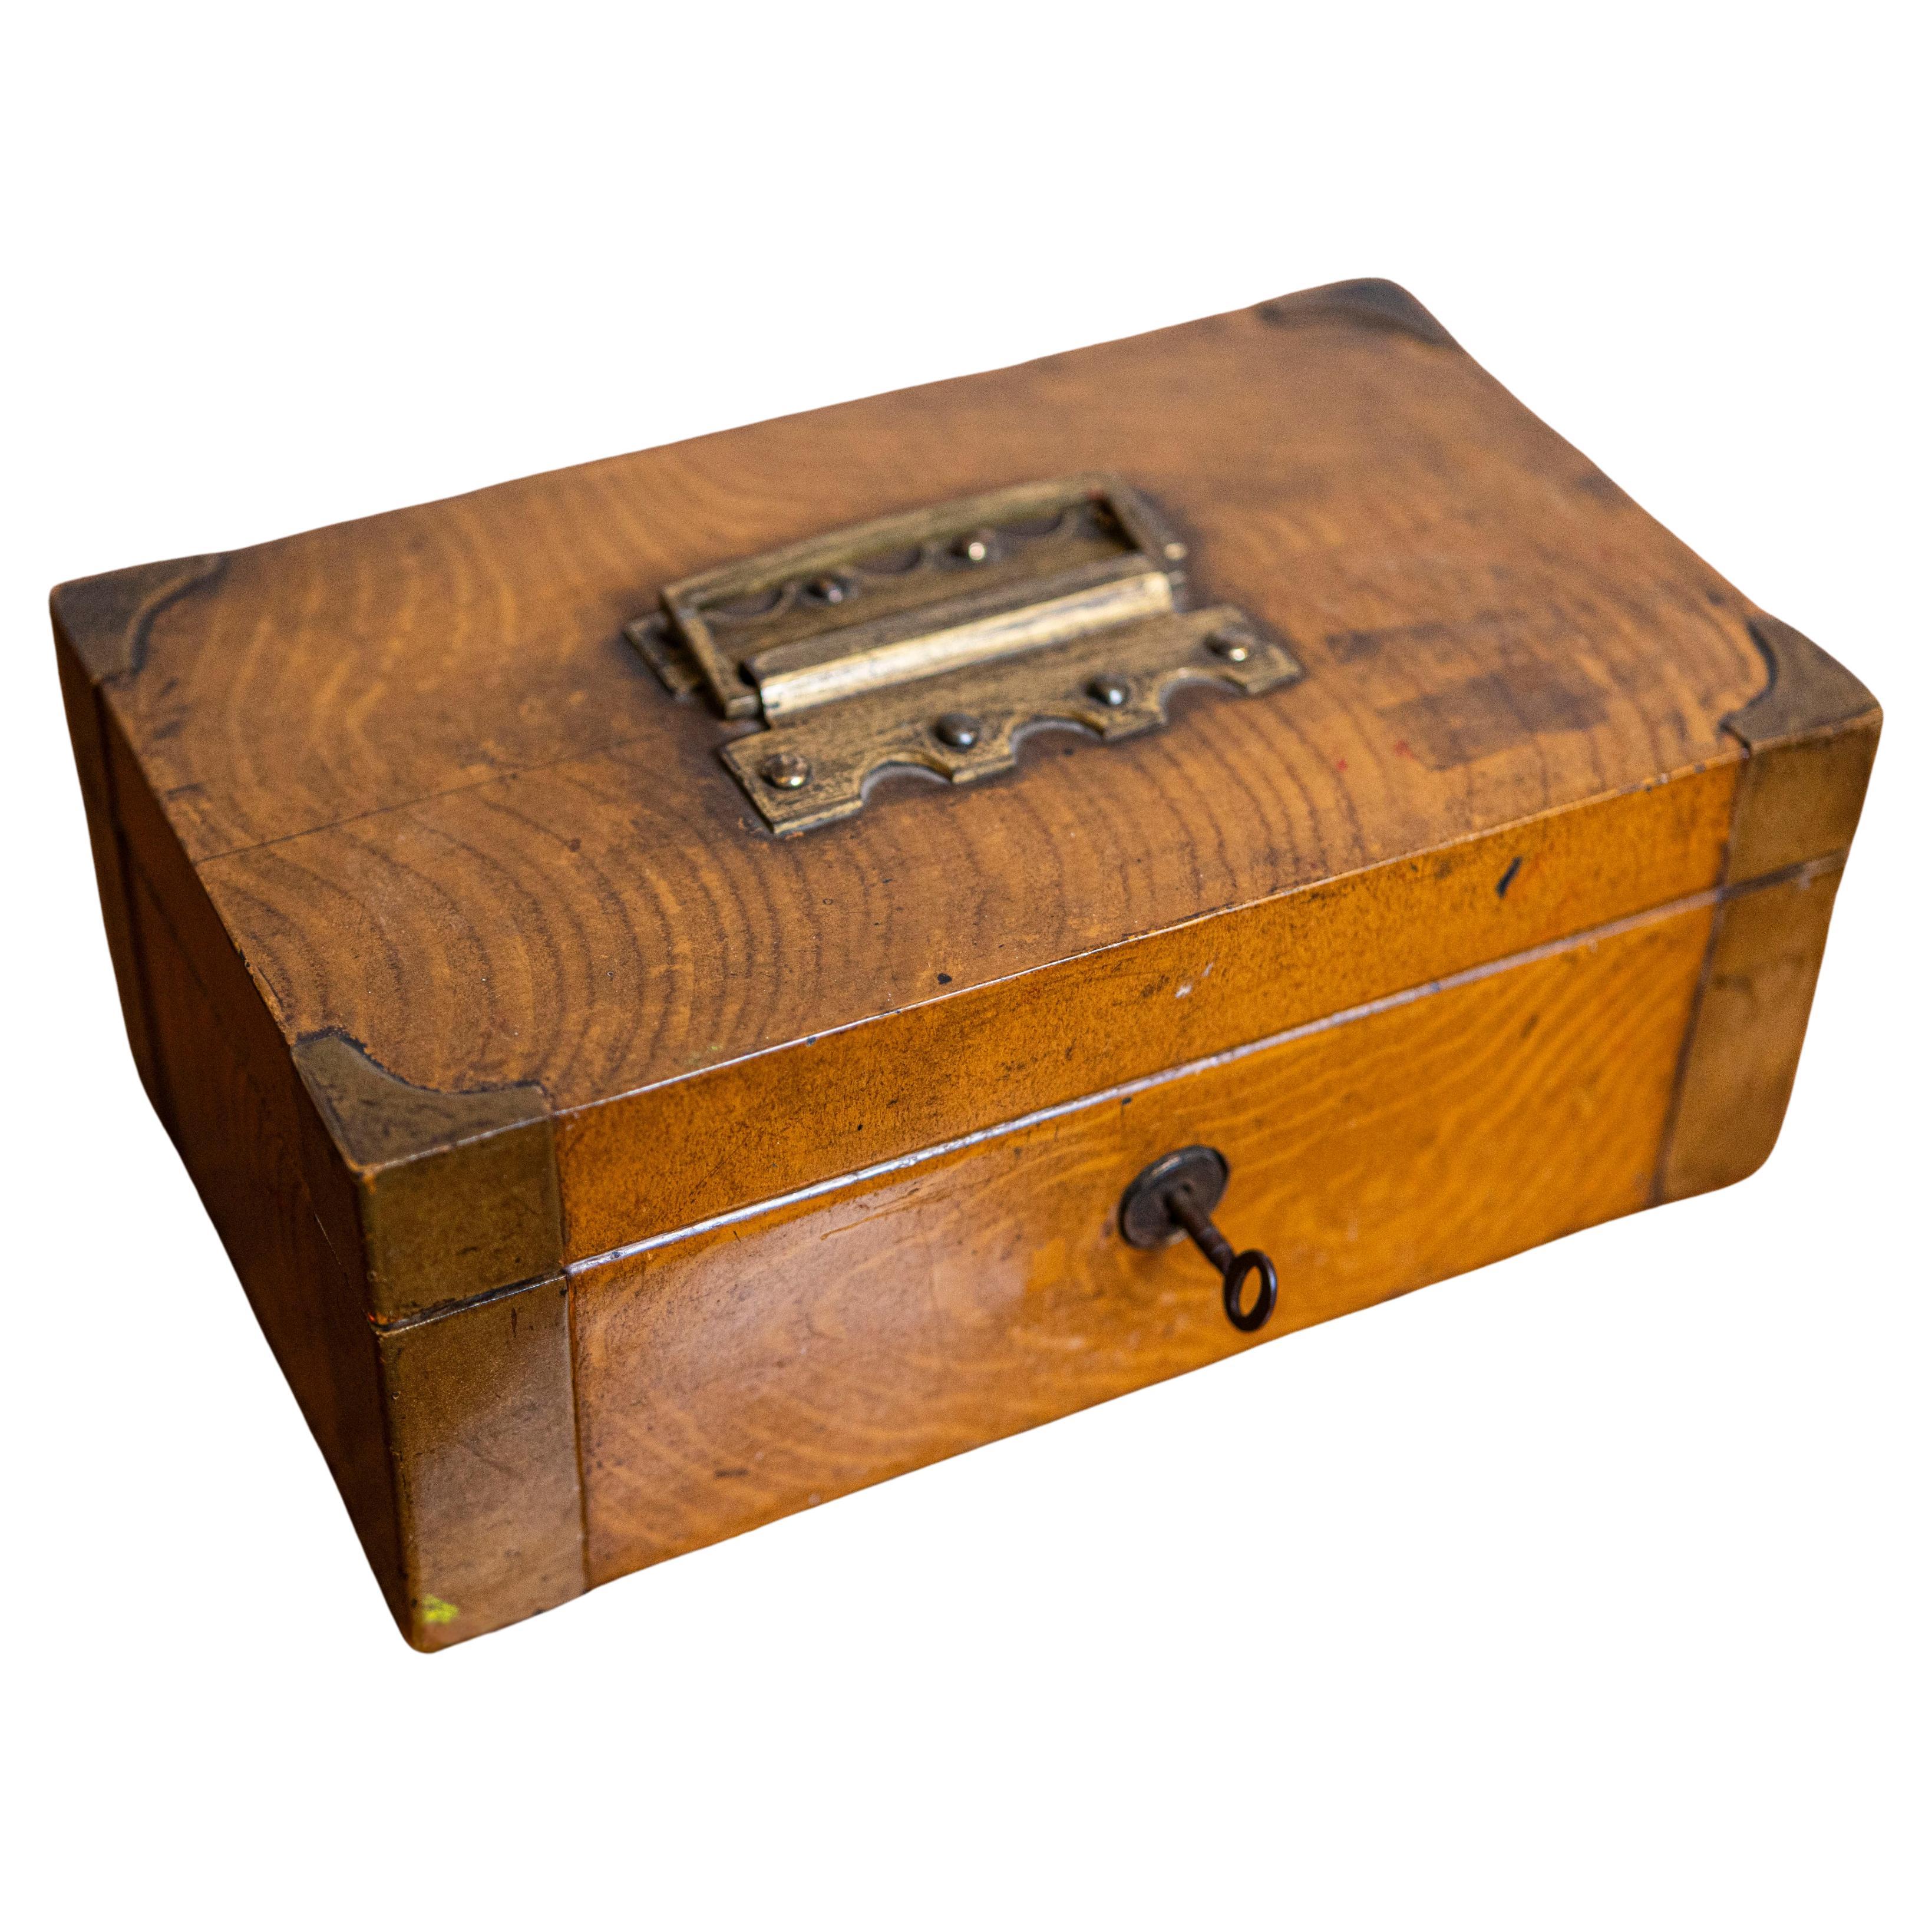 English Victorian Period Bank Storage Box with Brass Accents and Metal Interior